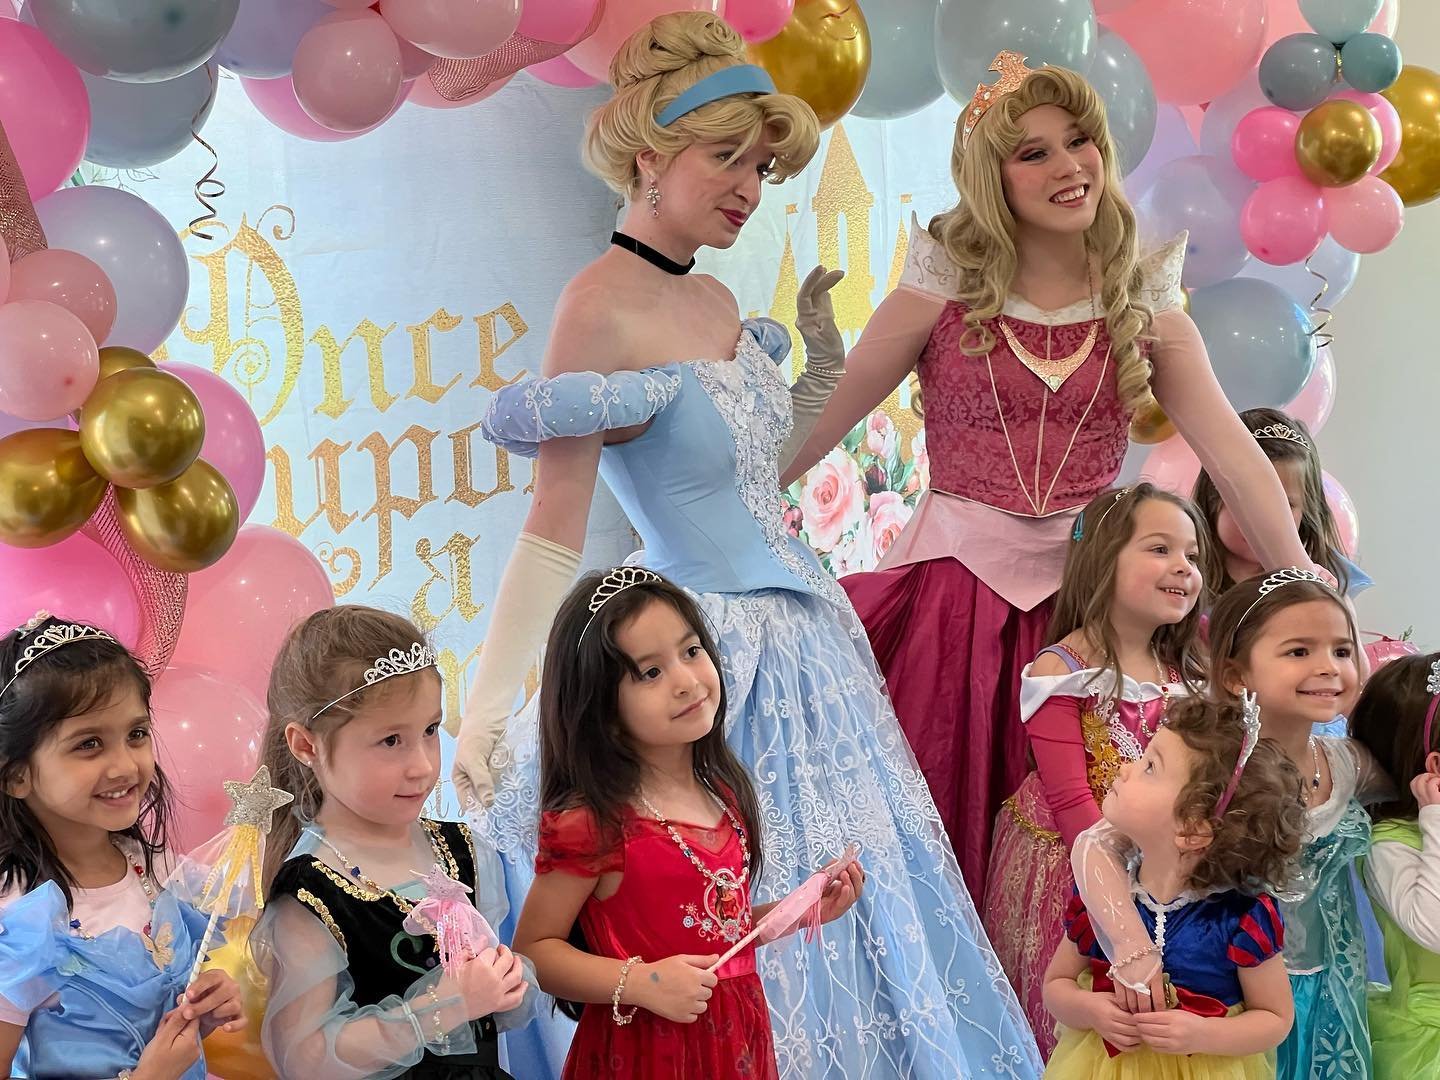 Make it pink! Make it blue! Still dreaming about this beautiful party! 🩷💙
.
.
#princessparty #princesspartyideas #partyprincess #princesscosplay #cinderella #aurora